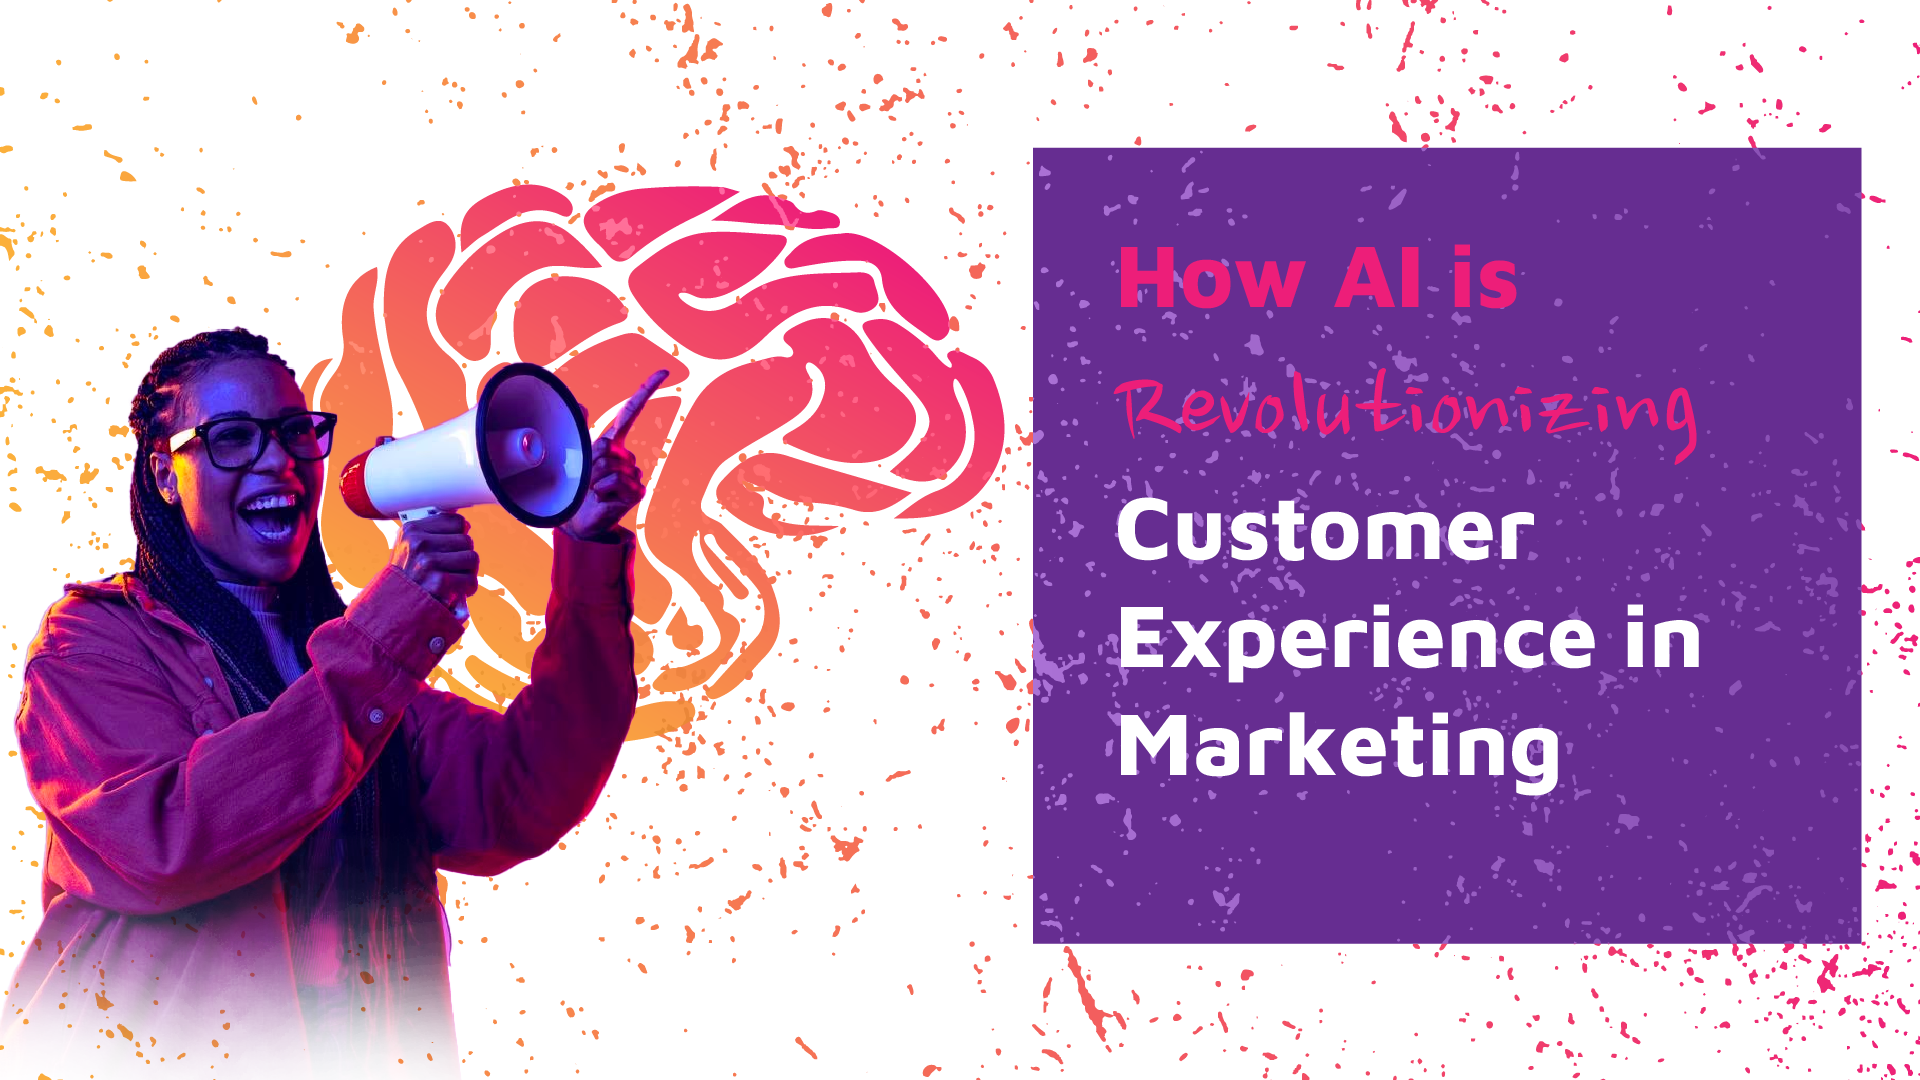 How-AI-is-Revolutionizing-Customer-Experience-in-Marketing